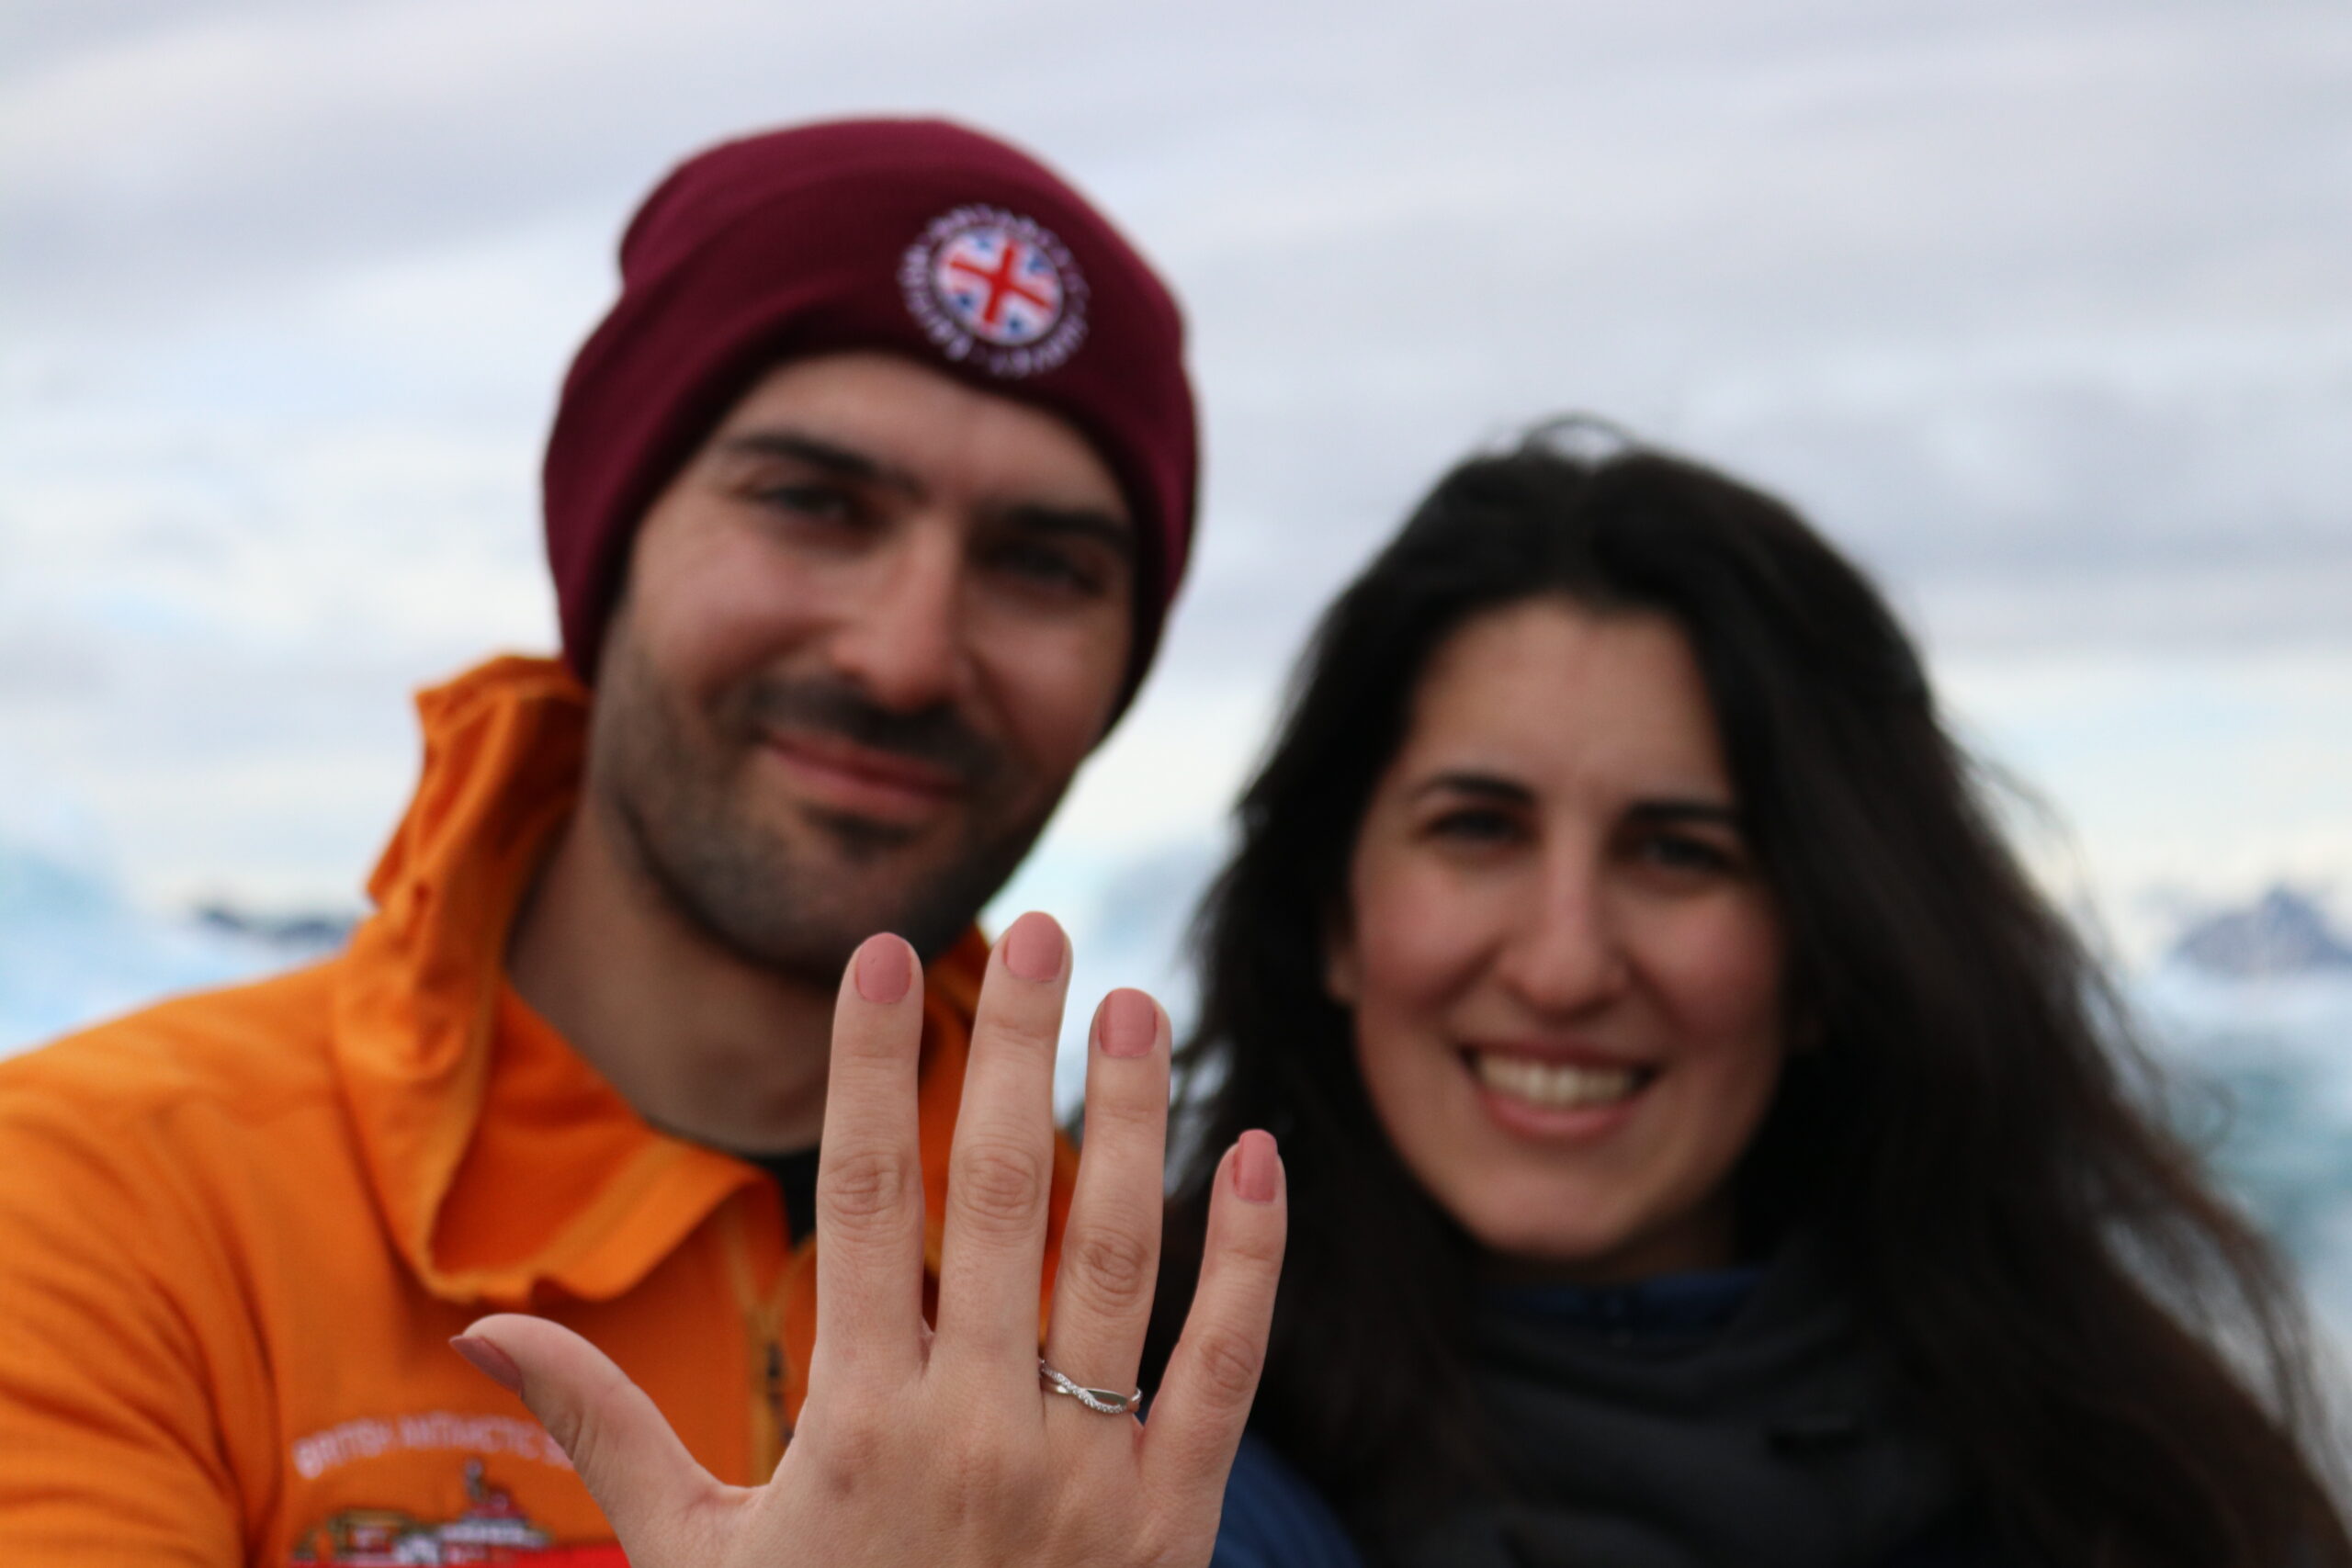 A smiling man and a woman holding up a hand to display an engagement ring